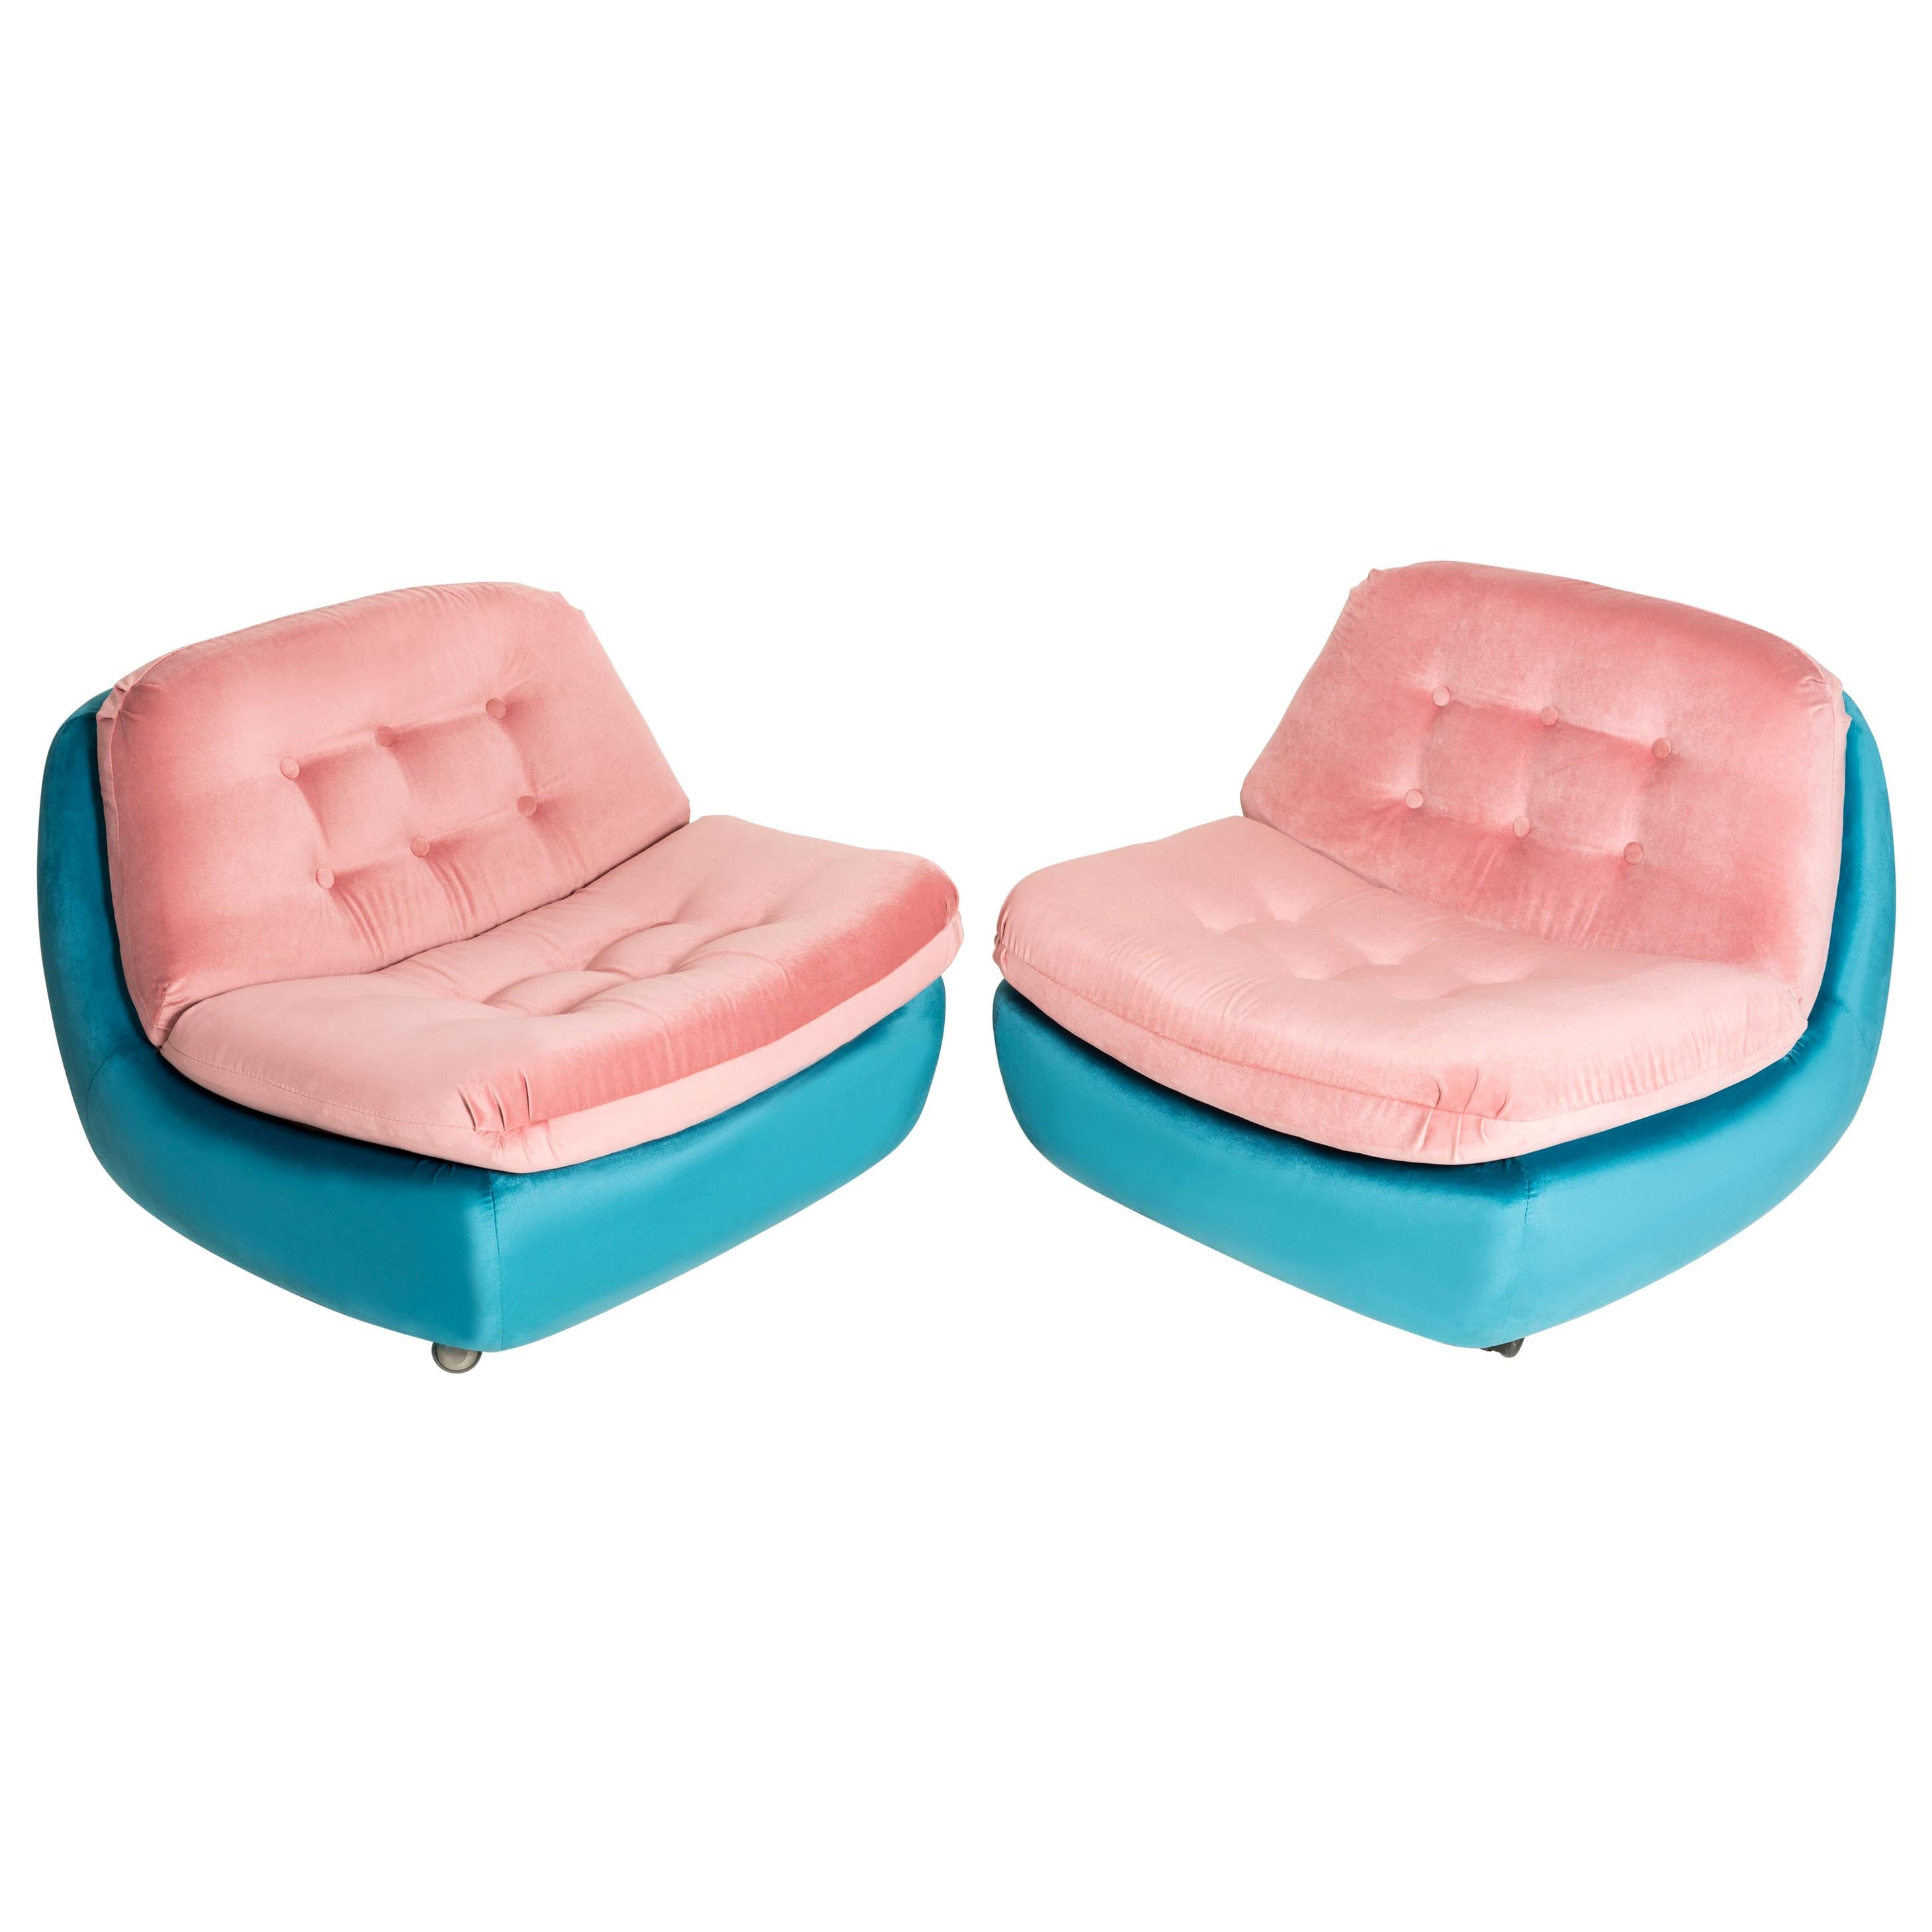 Two 20th Century Vintage Pink and Blue Atlantis Armchairs, 1960s